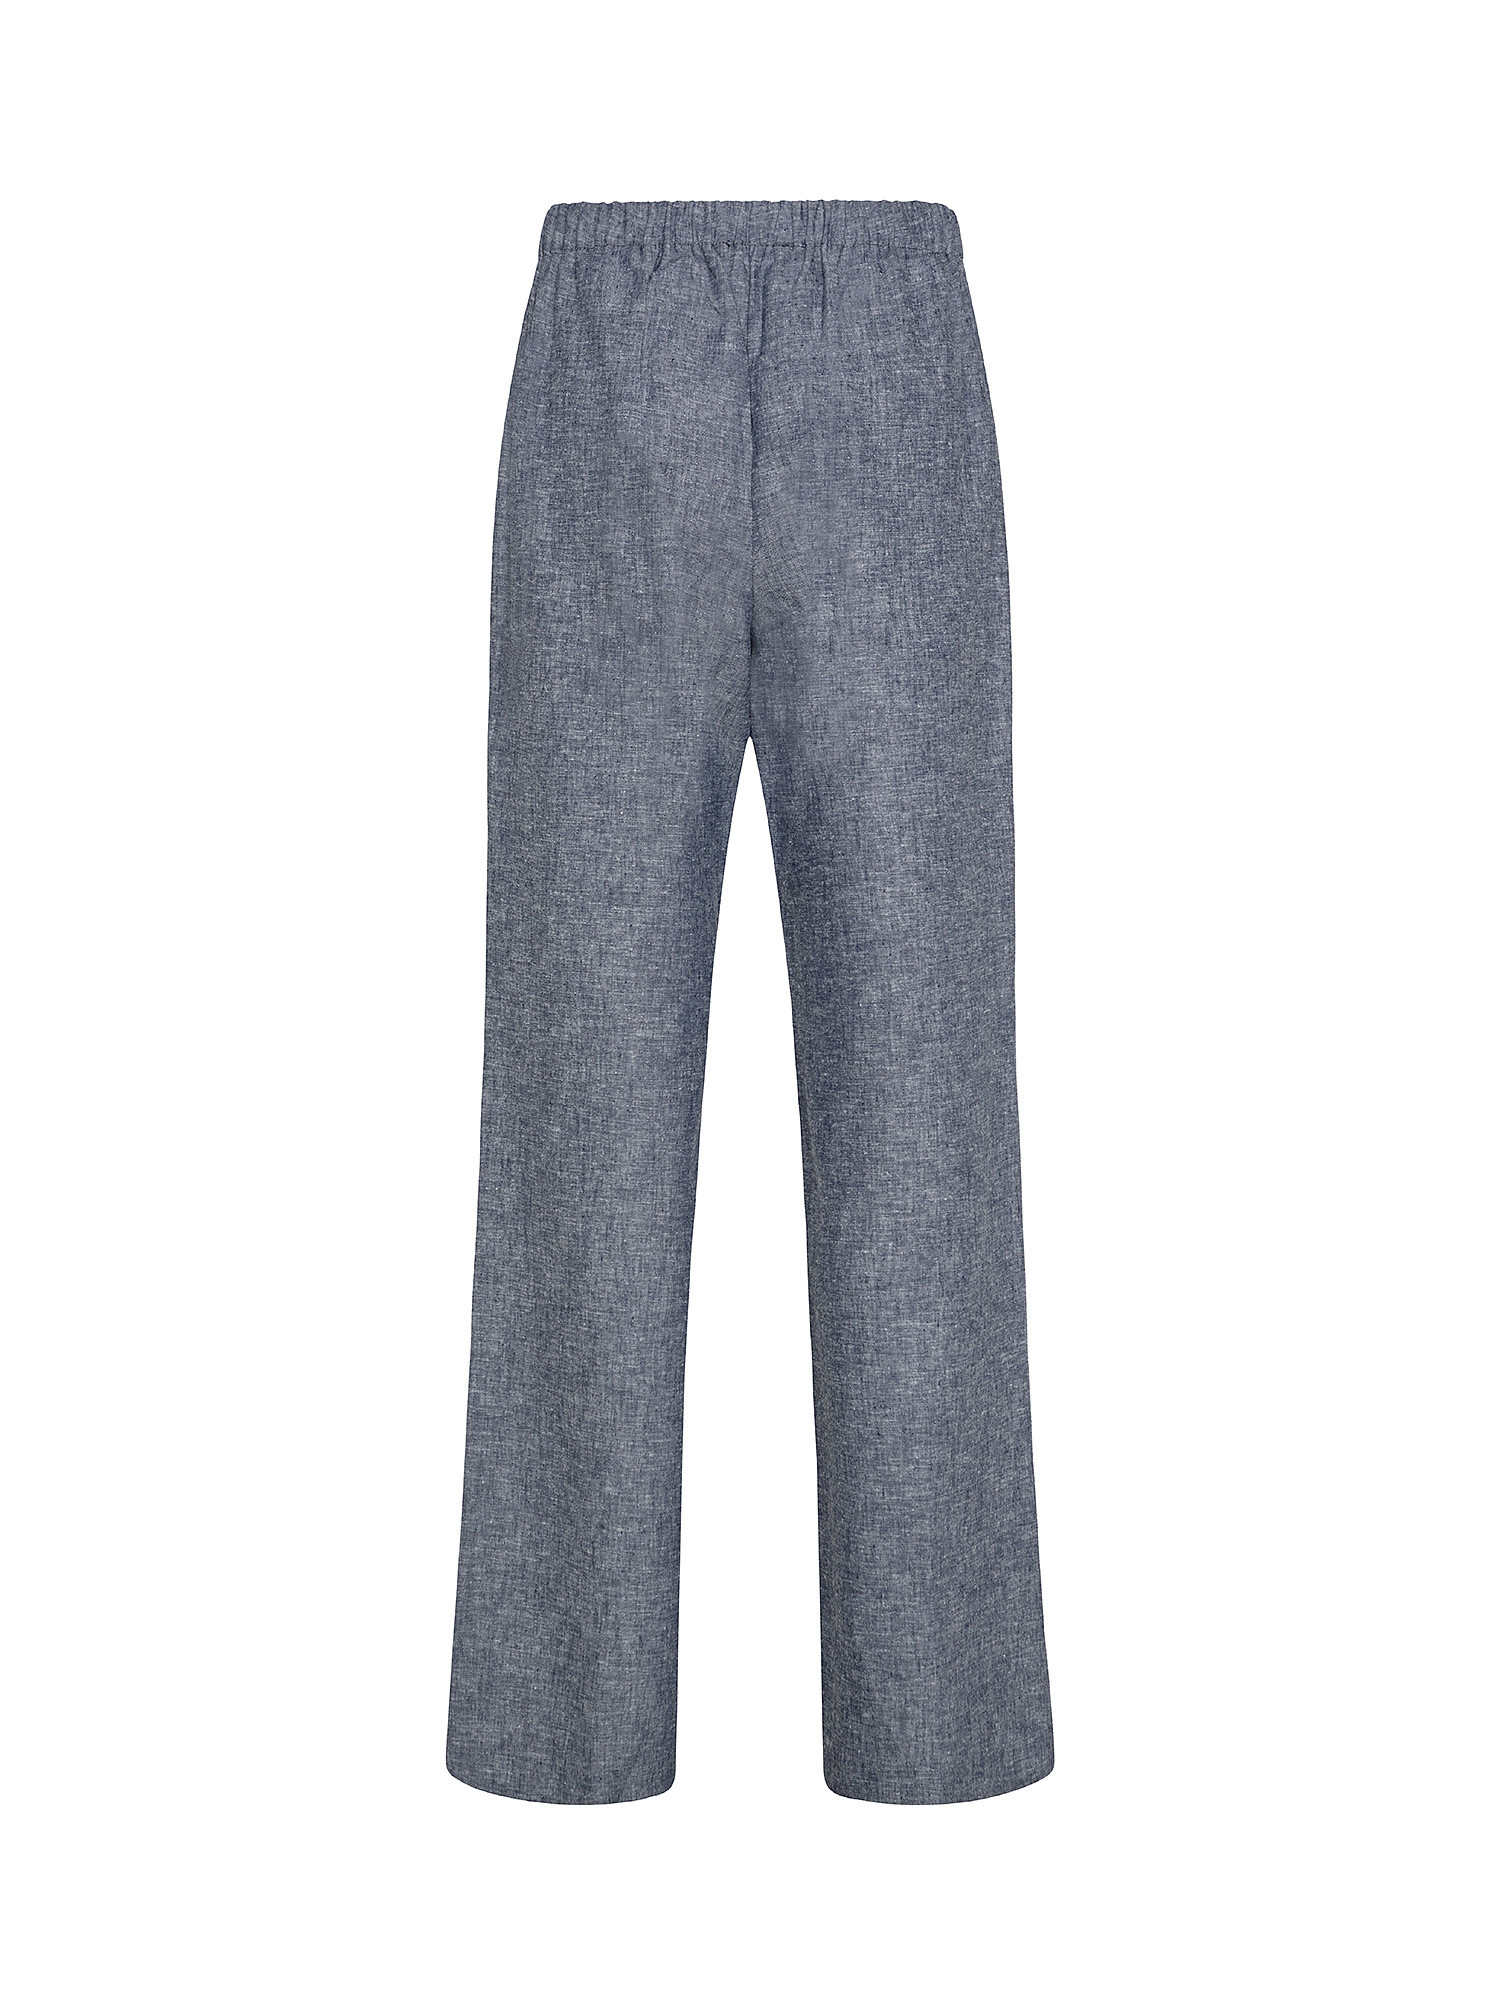 Trousers with fabric belt, Denim, large image number 1